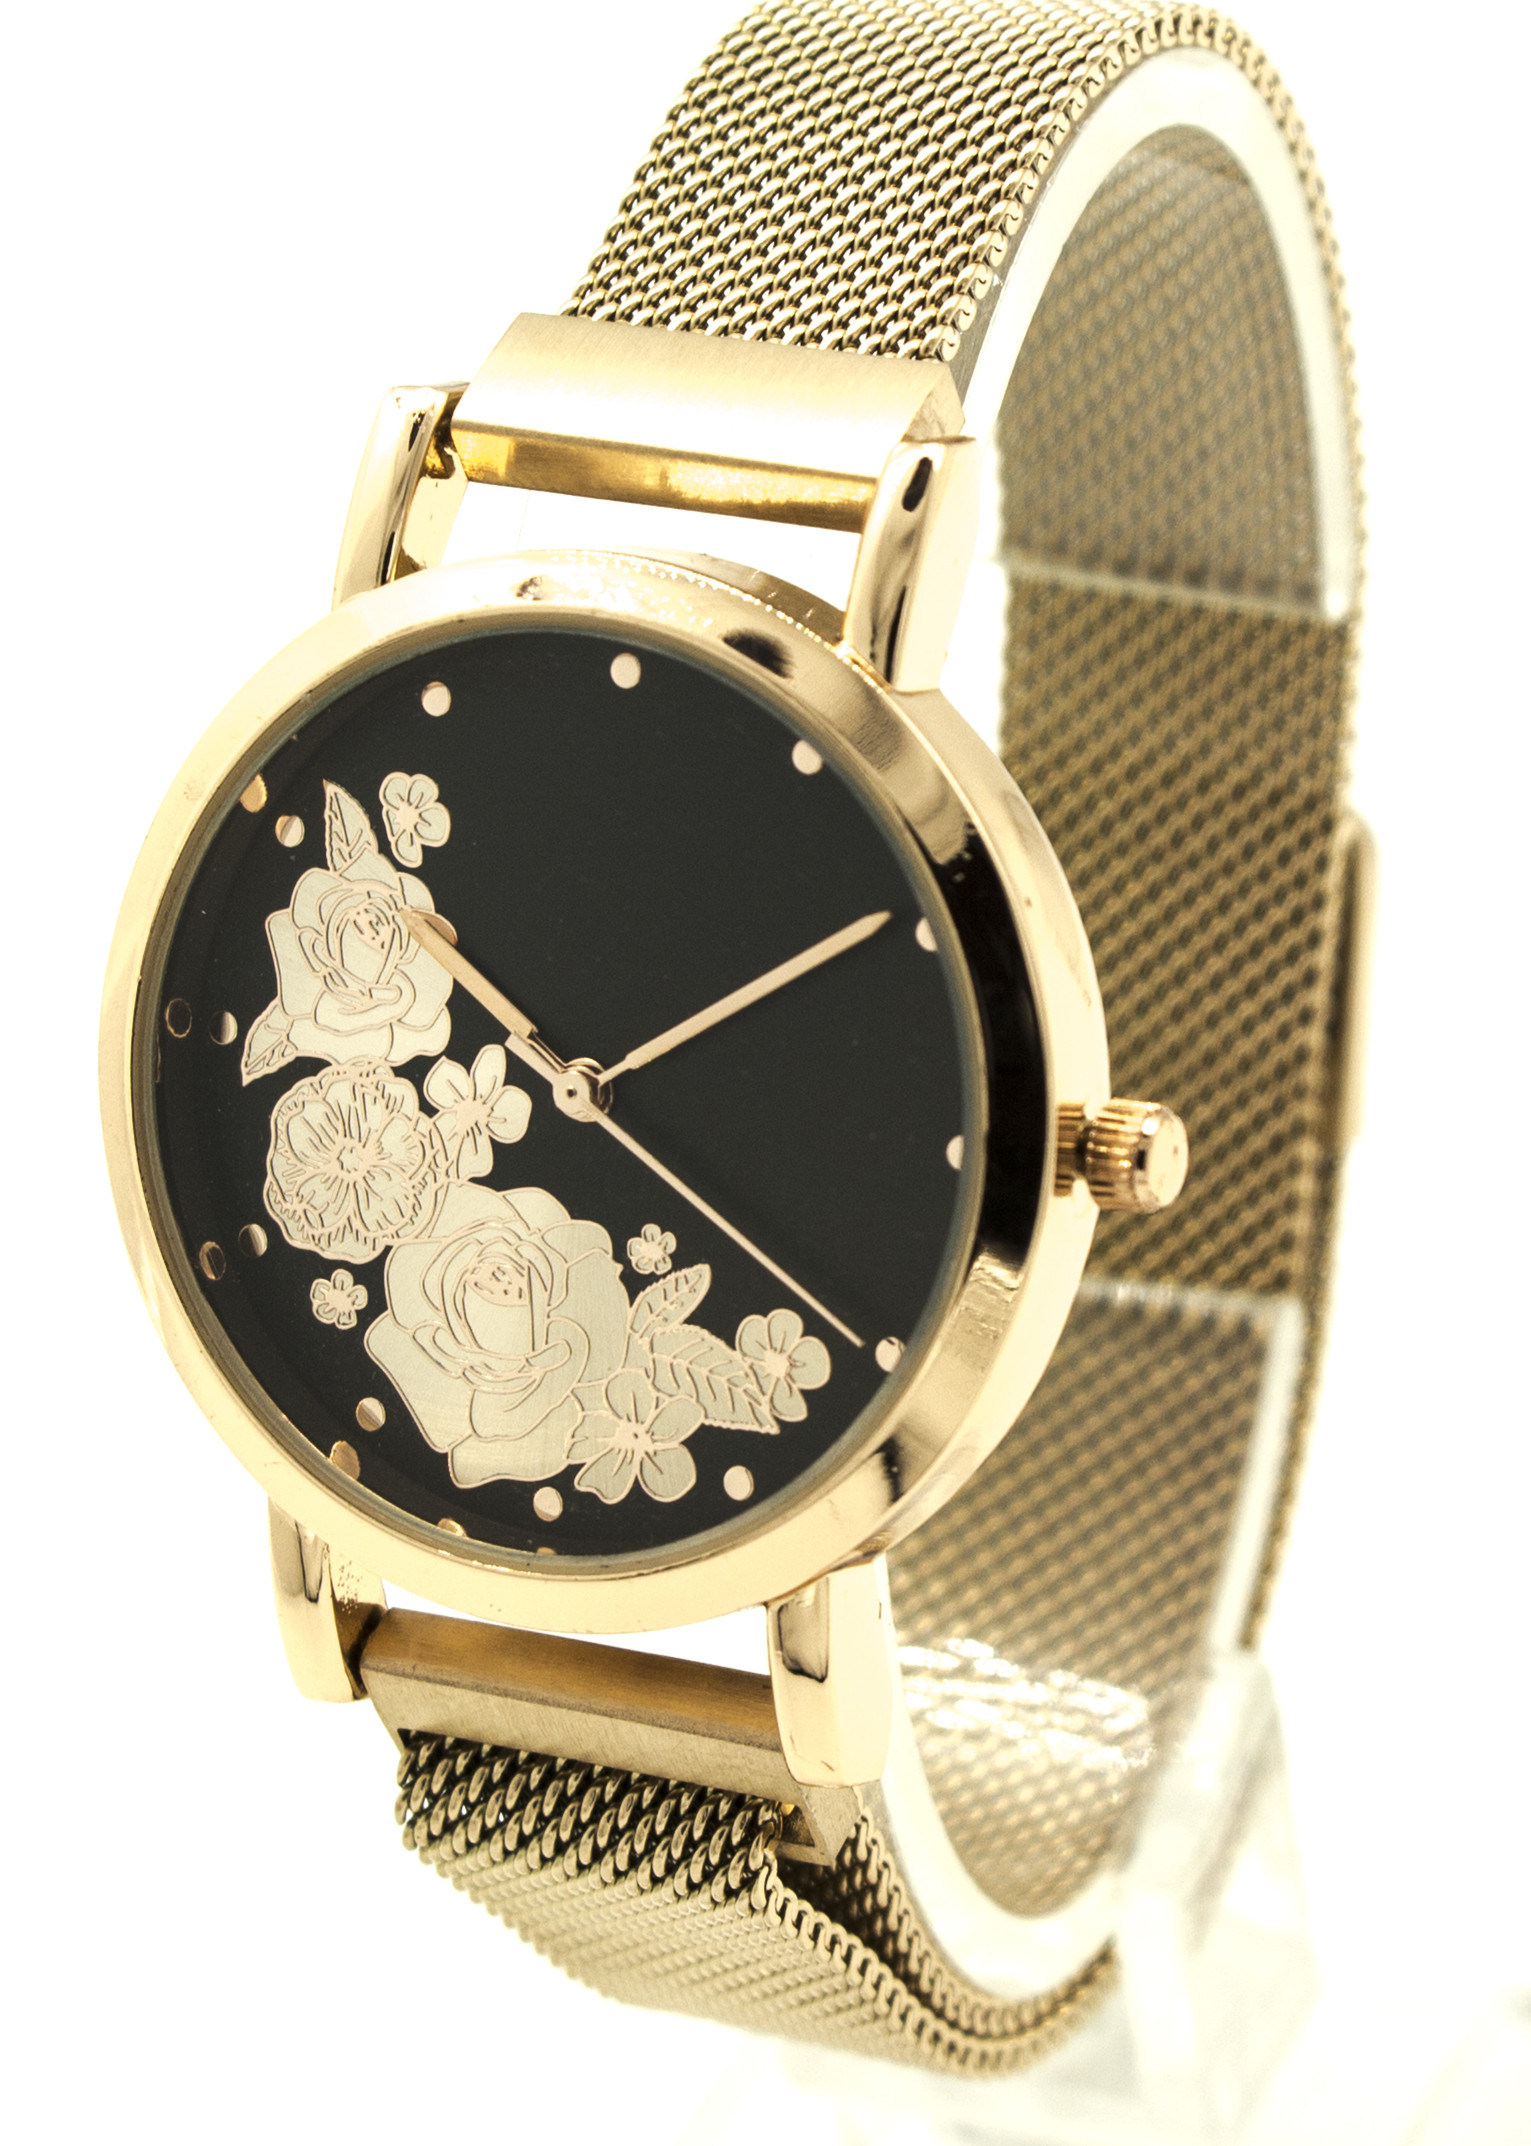 New Women Mesh Band Watch With UP Face